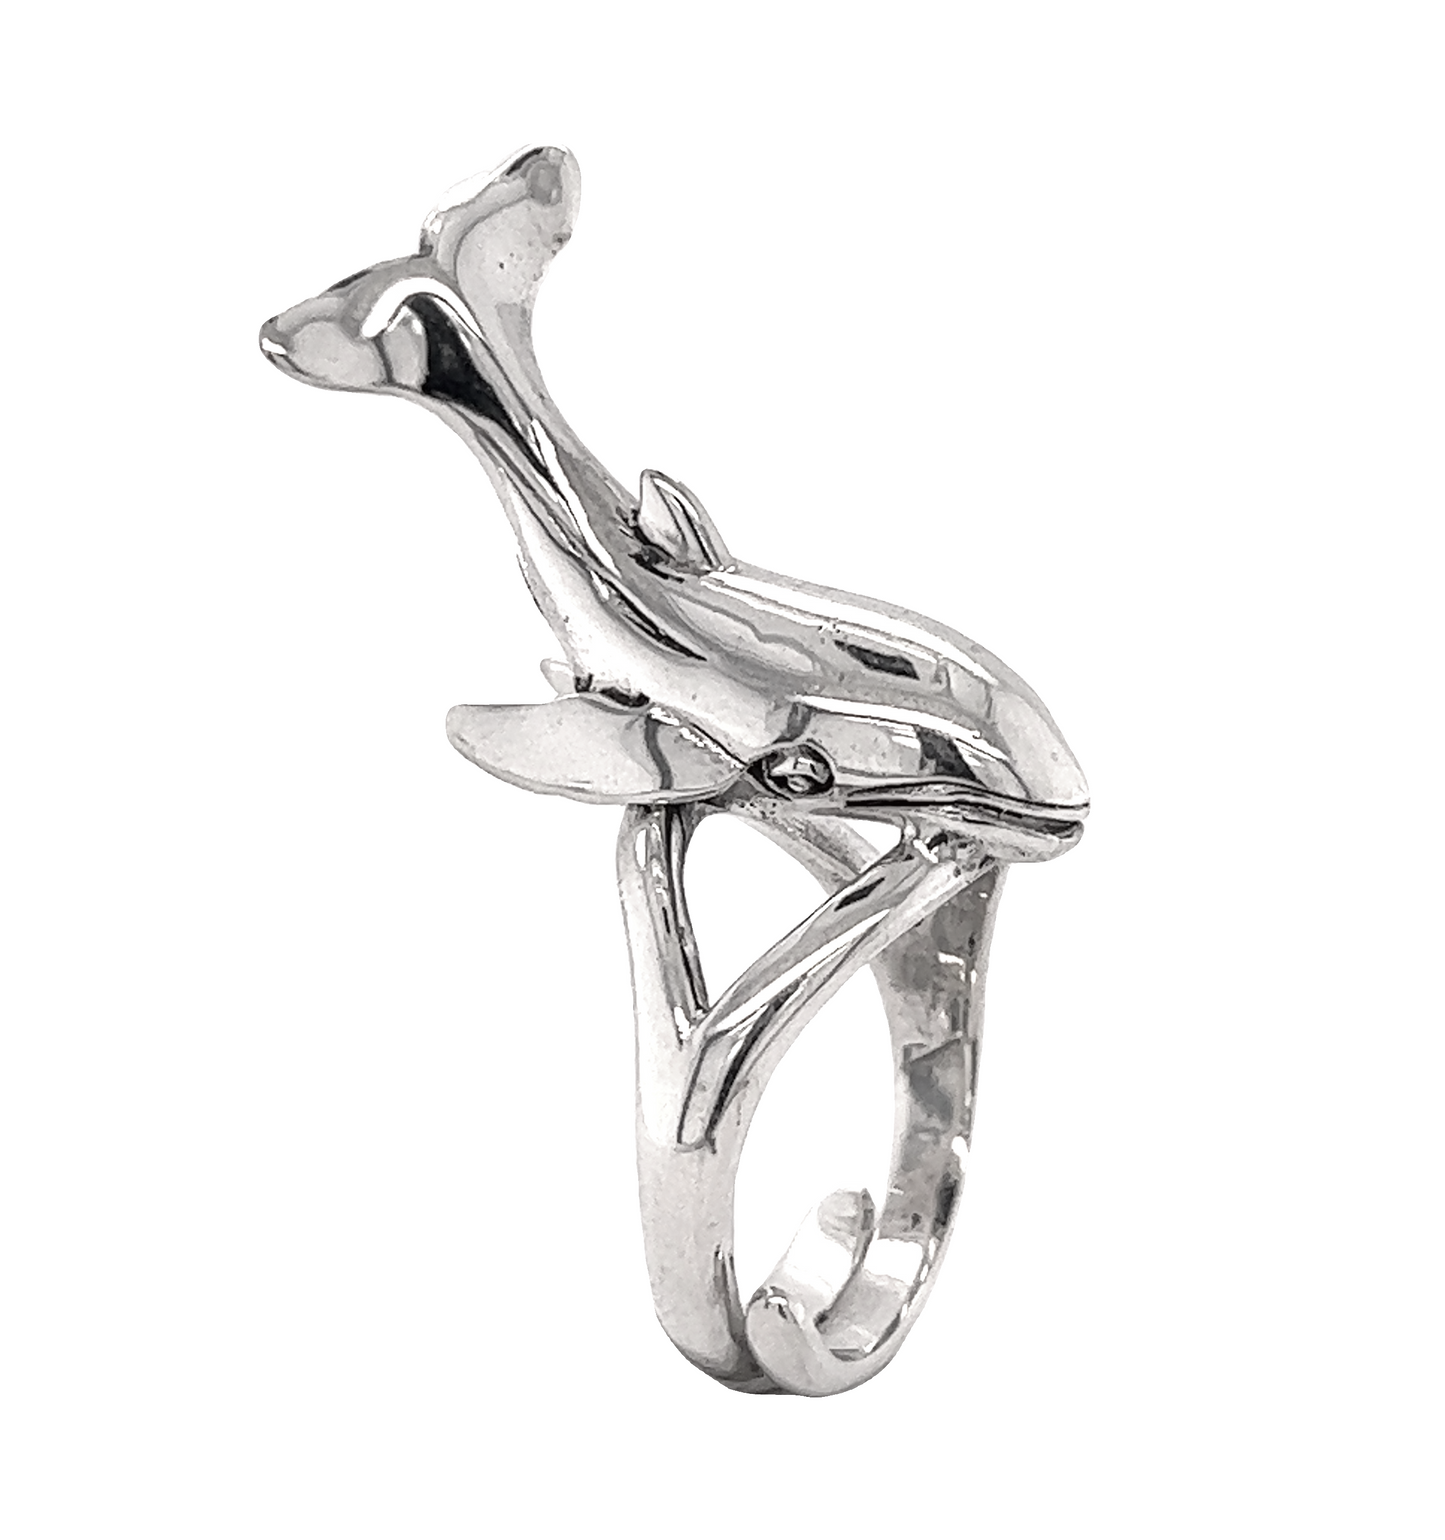 An exceptional whale ring.